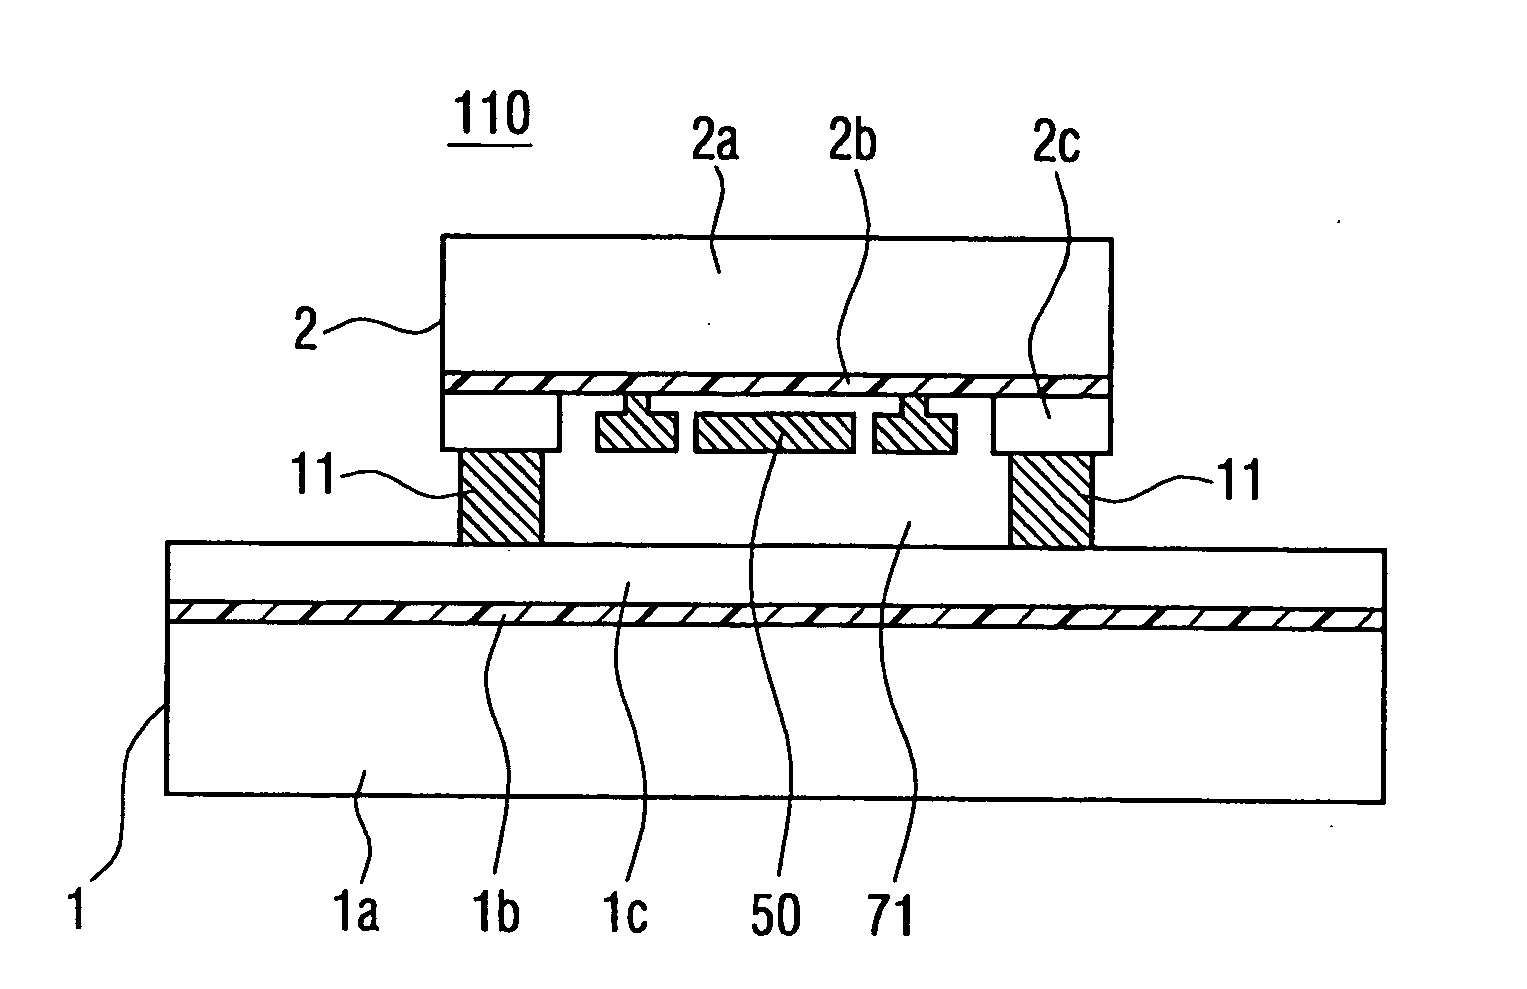 Semiconductor device having multiple substrates